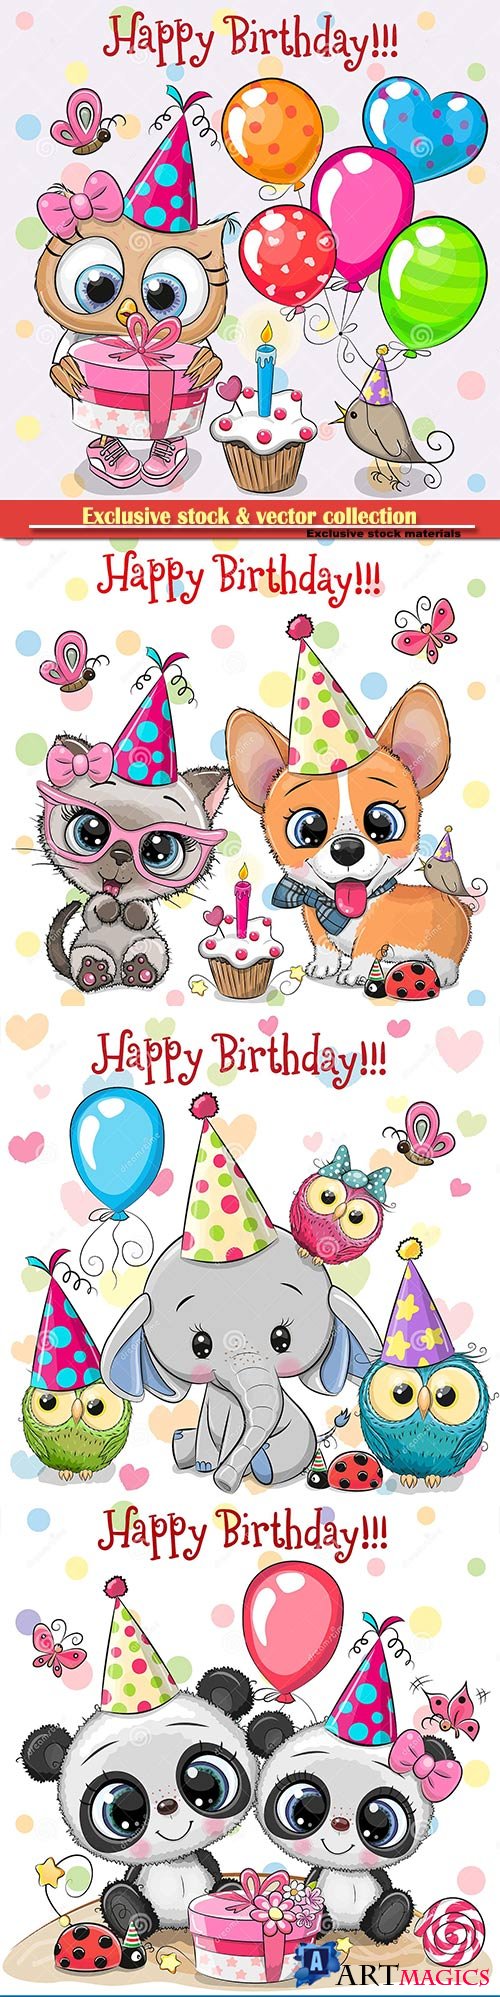 Birthday card with cute animals with balloon and bonnets